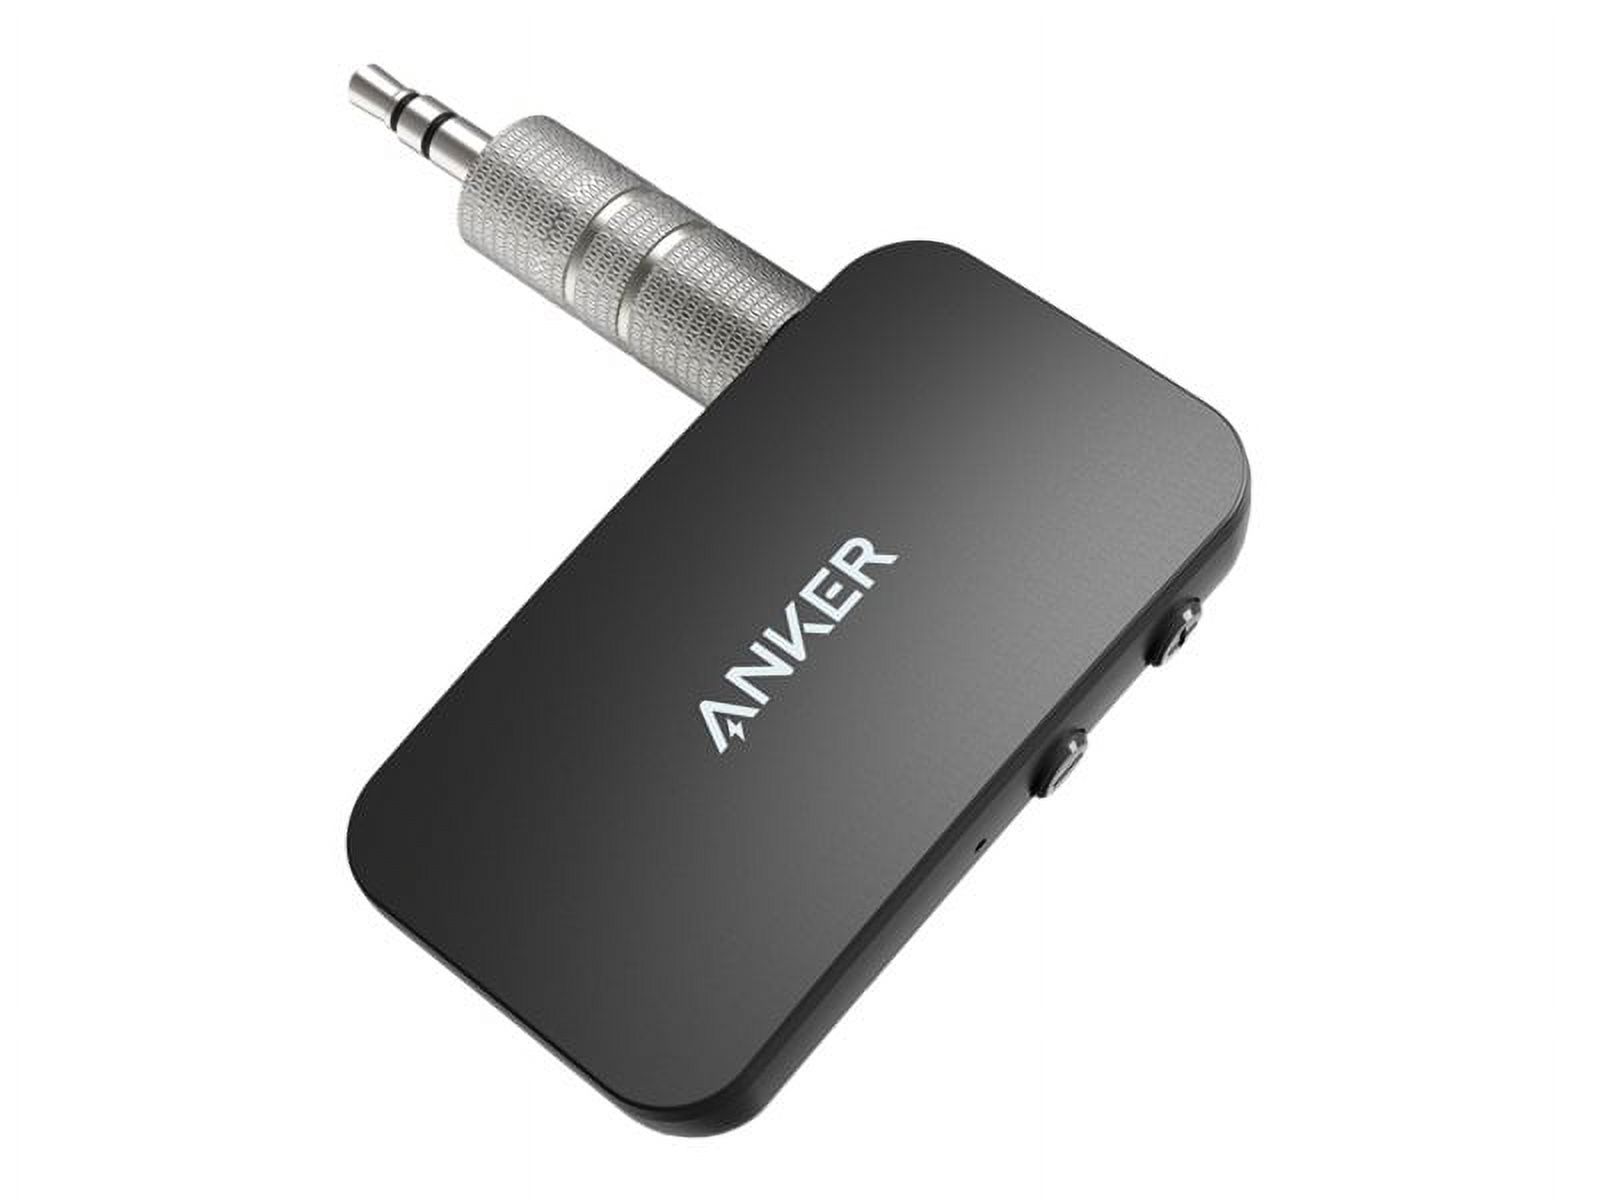 Anker Soundsync A3352 Bluetooth Receiver for Music Streaming with Bluetooth 5.0, 12-Hour Battery Life, Handsfree Calls, Dual Device Connection, for Car, Home Stereo, Headphones, Speakers - image 2 of 5